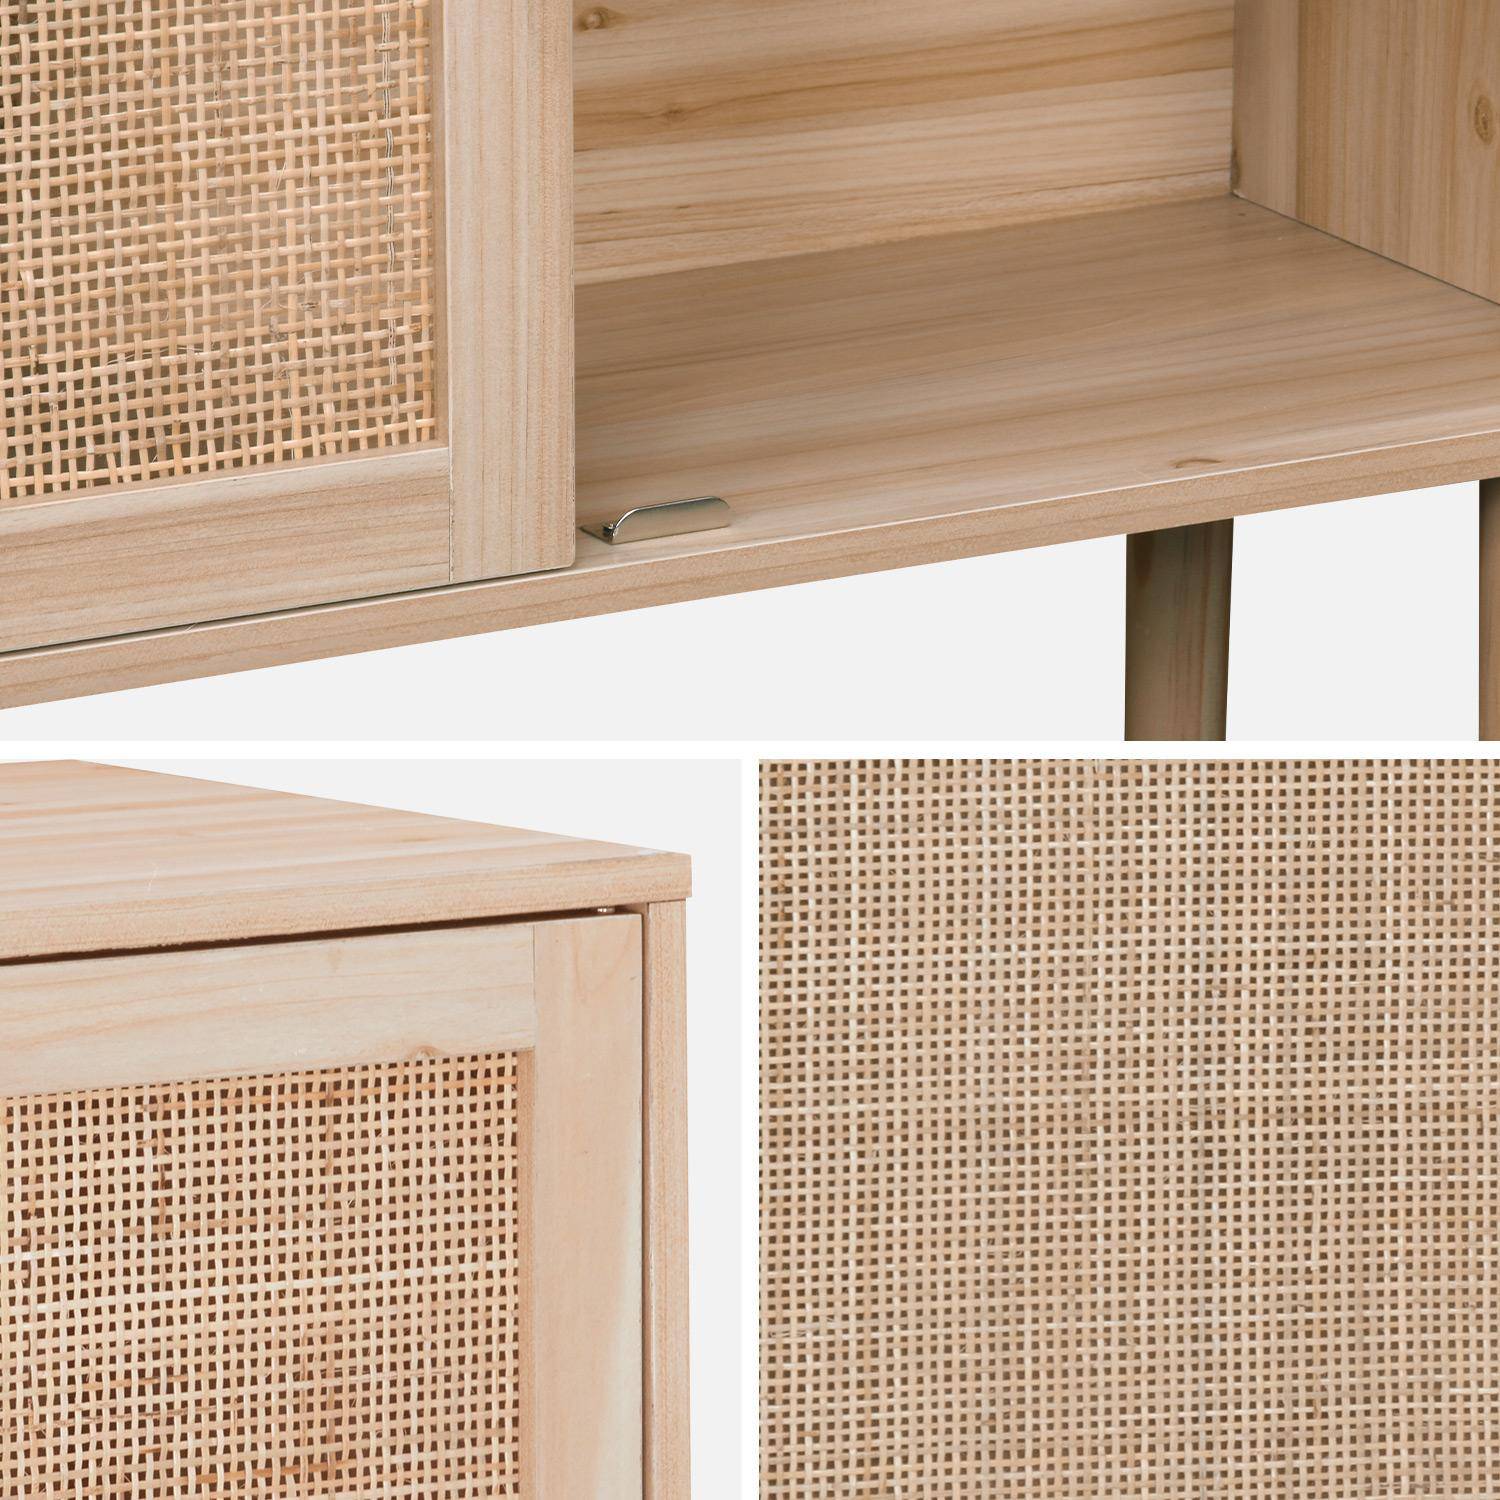 Wood and woven rattan 2-door storage cabinet with shelves, 80x30x68cm, Camargue, Natural,sweeek,Photo7